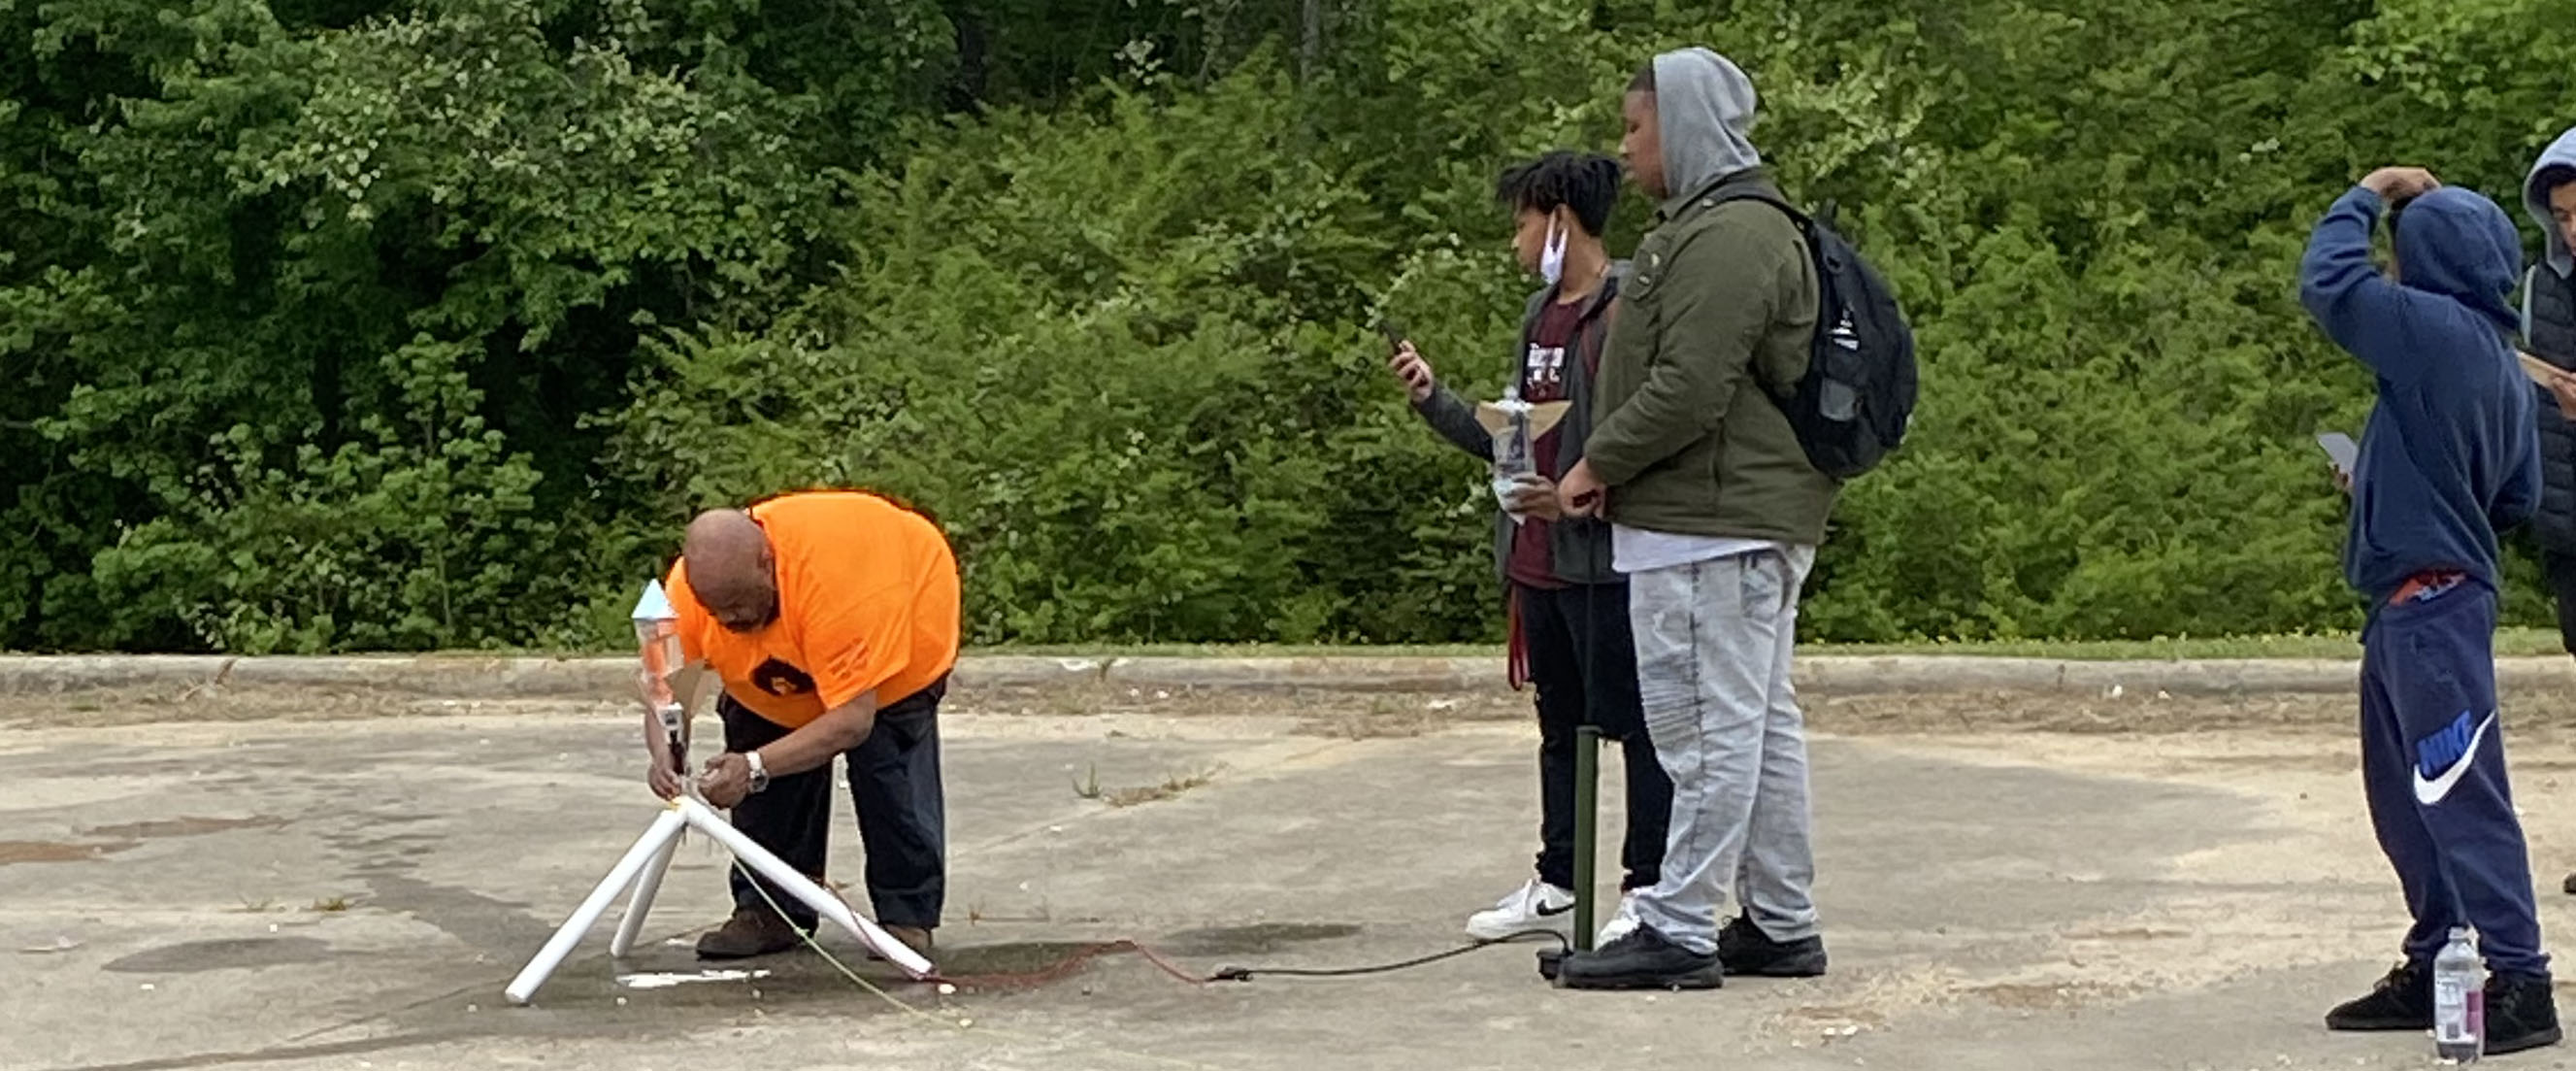 Person adjusting a homemade rocket on the ground while several students watch